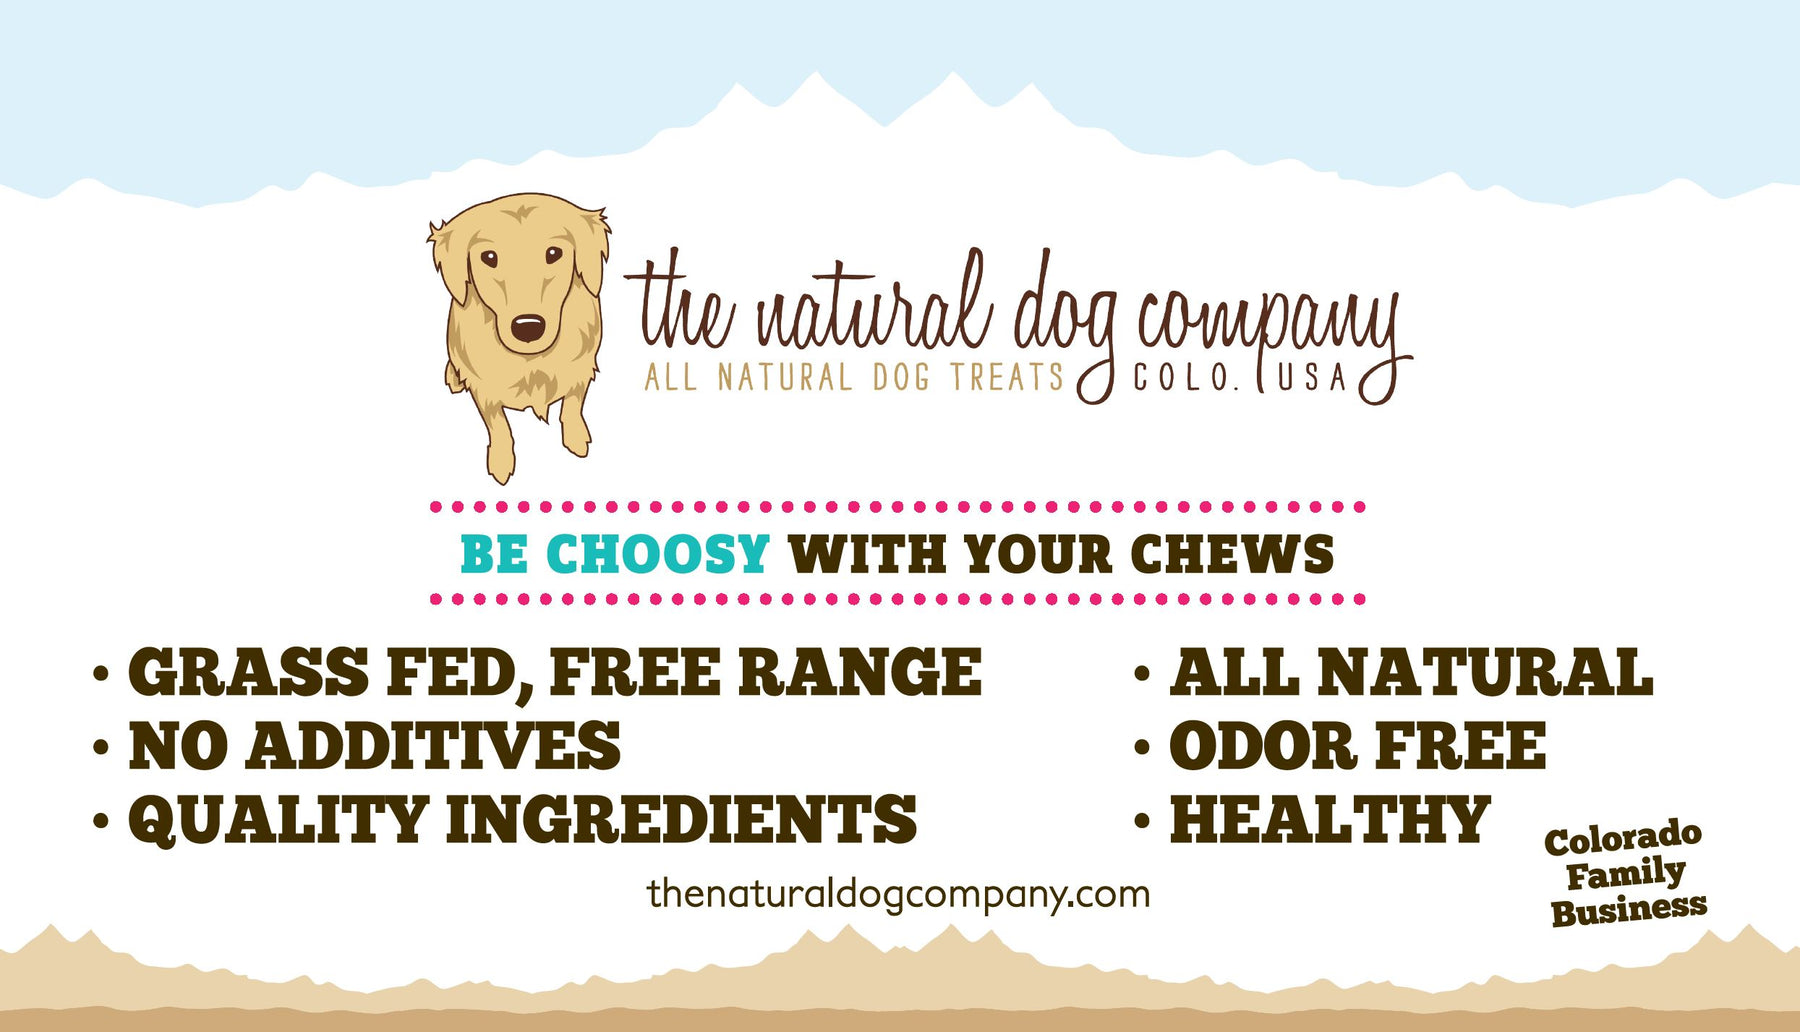 14"x8" Signs are available for retailers of The Natural Dog Company!